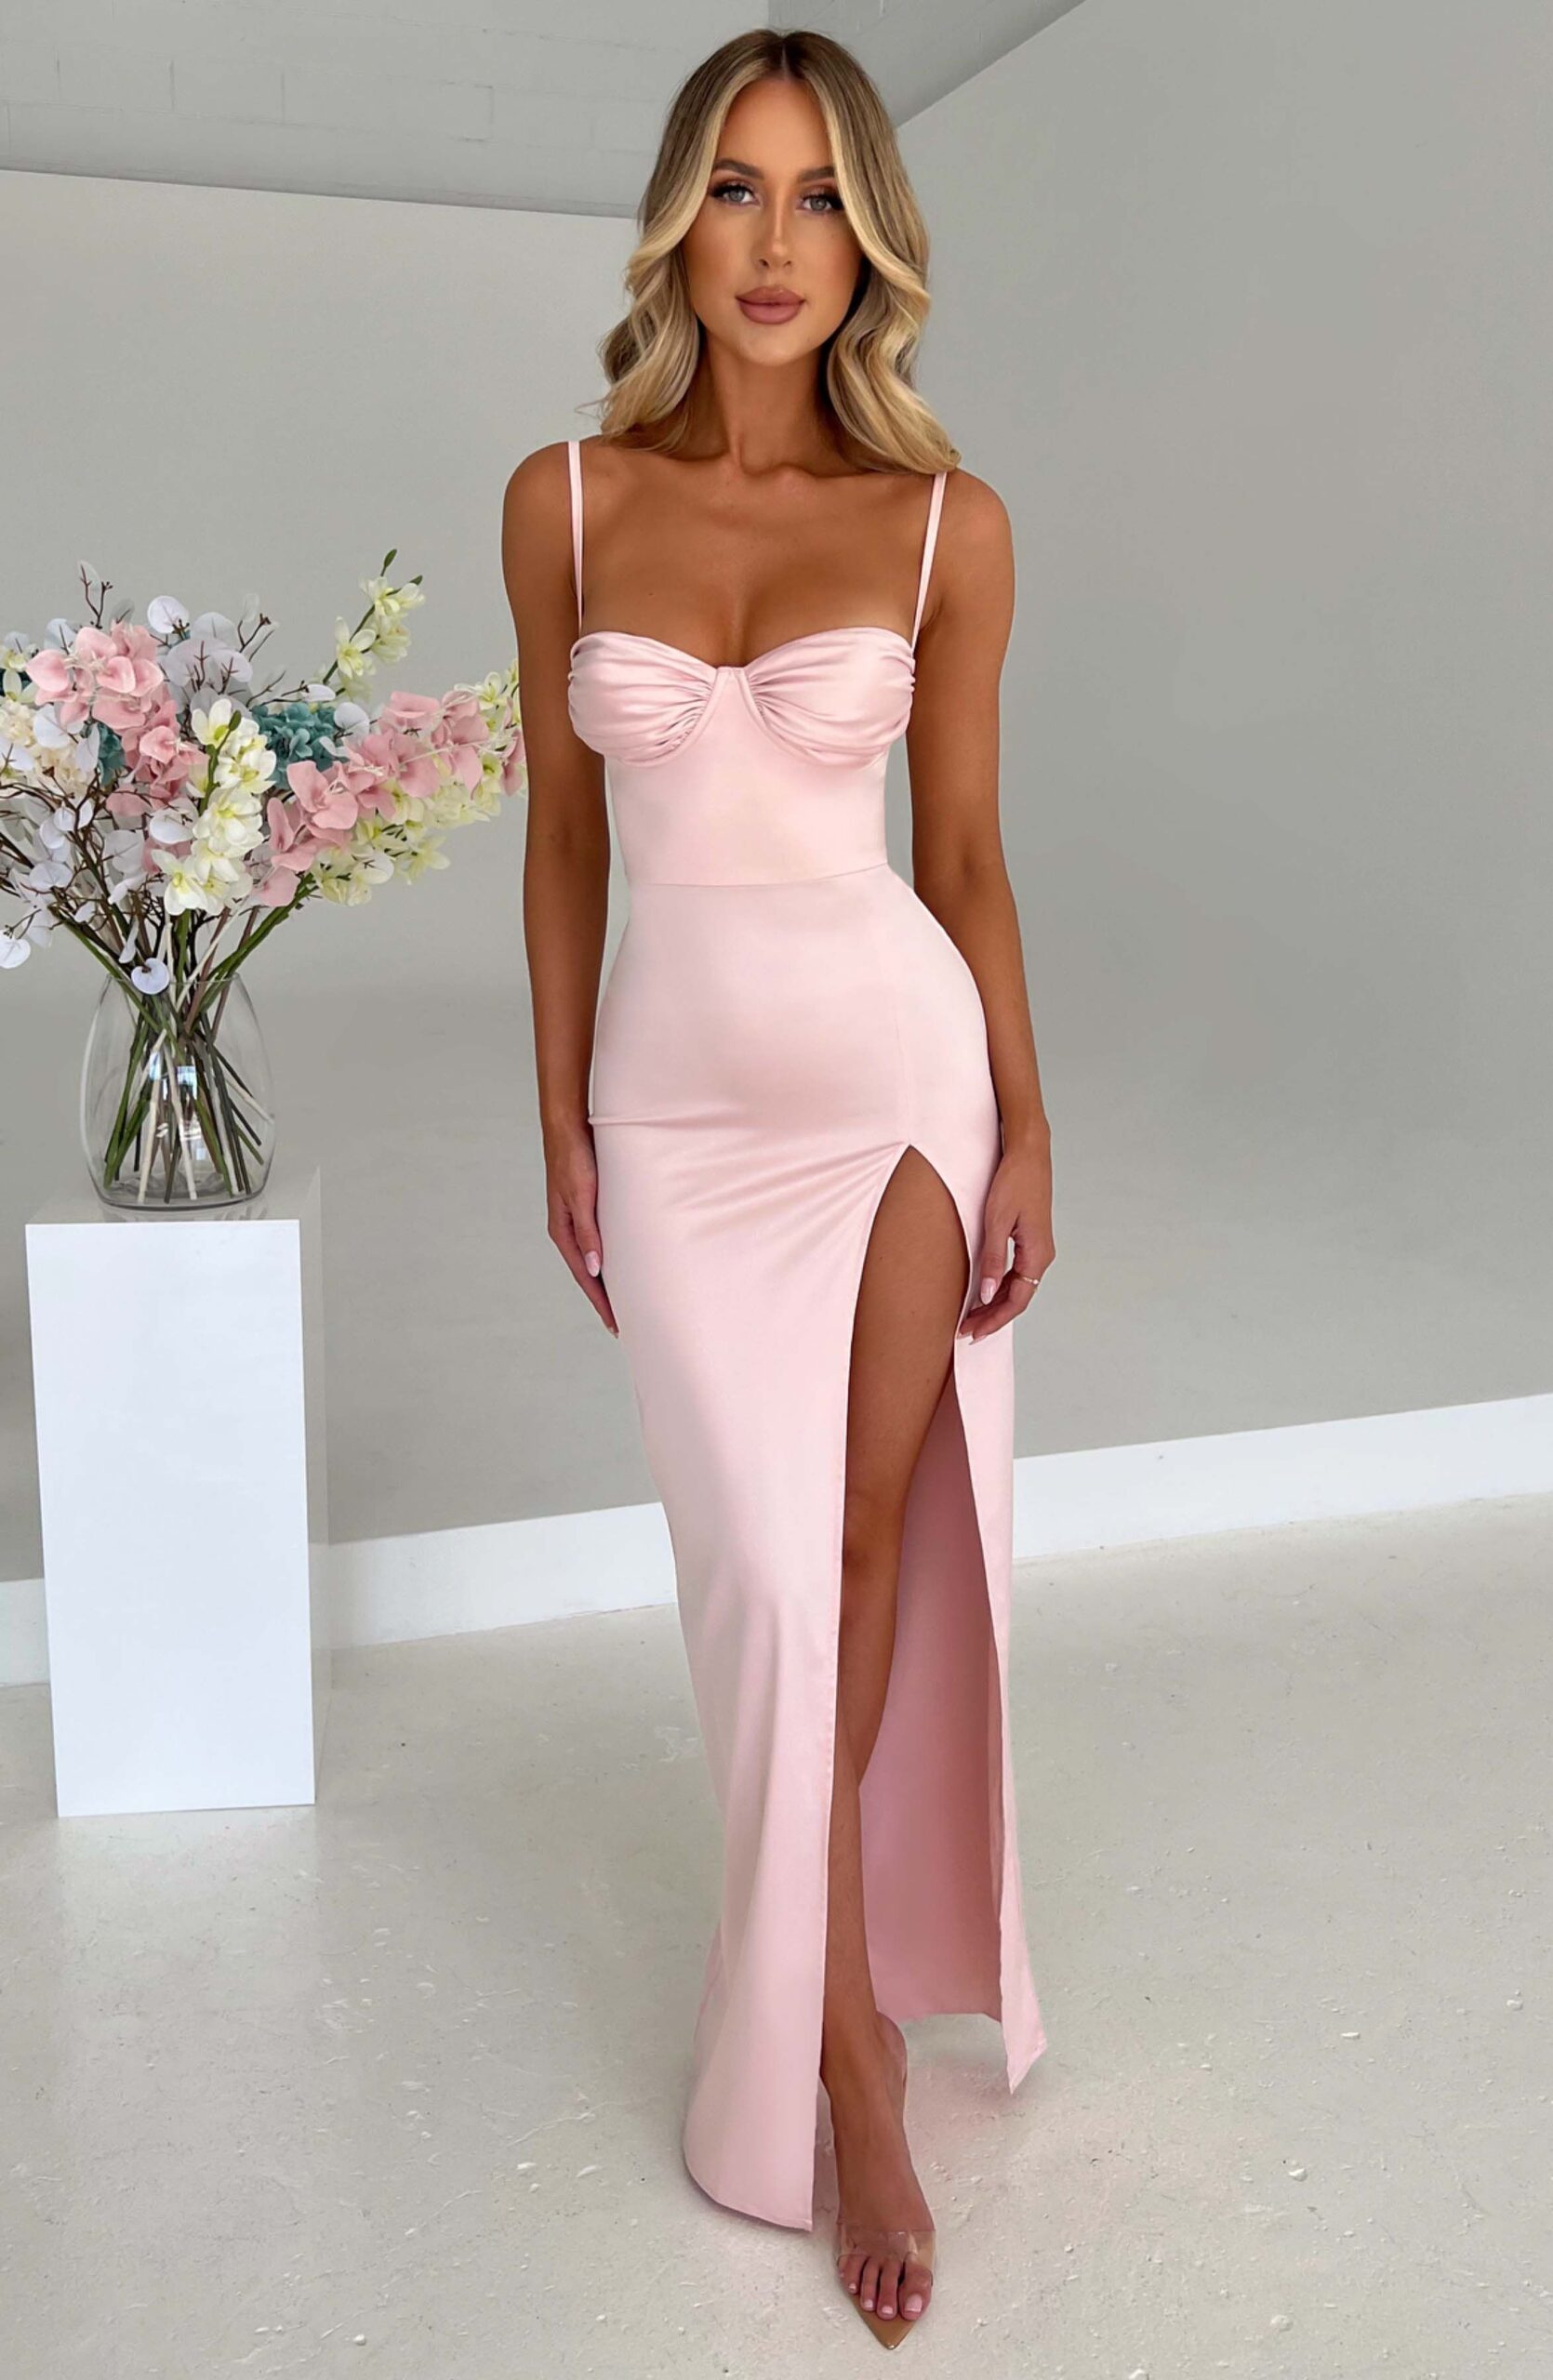 Formal Dresses: Sophisticated Ensembles for Special Occasions